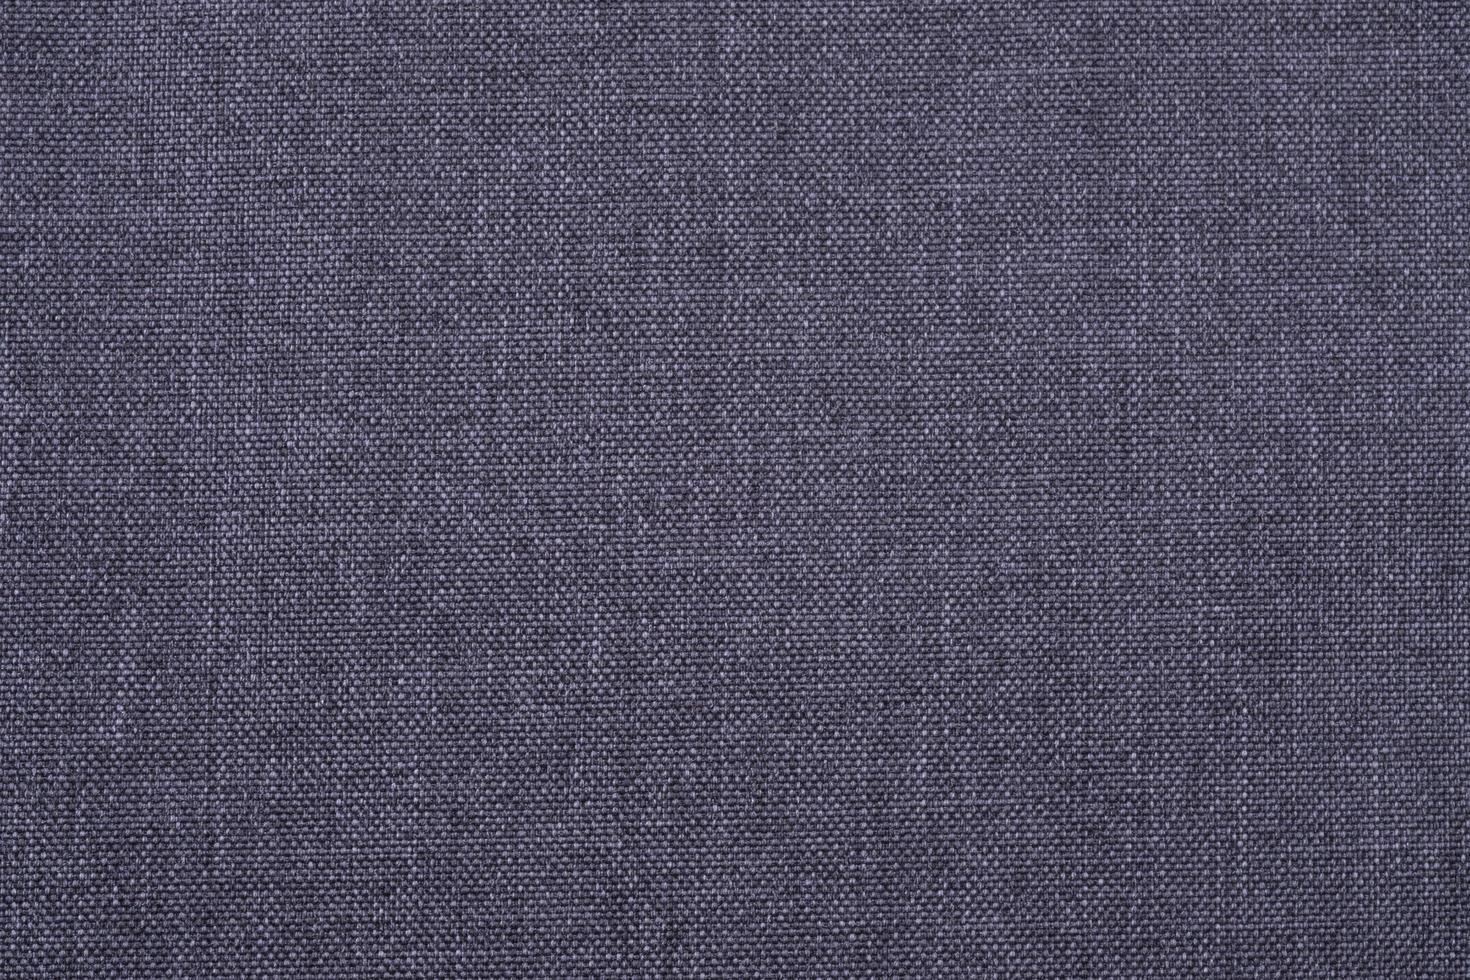 blue fabric texture background photo